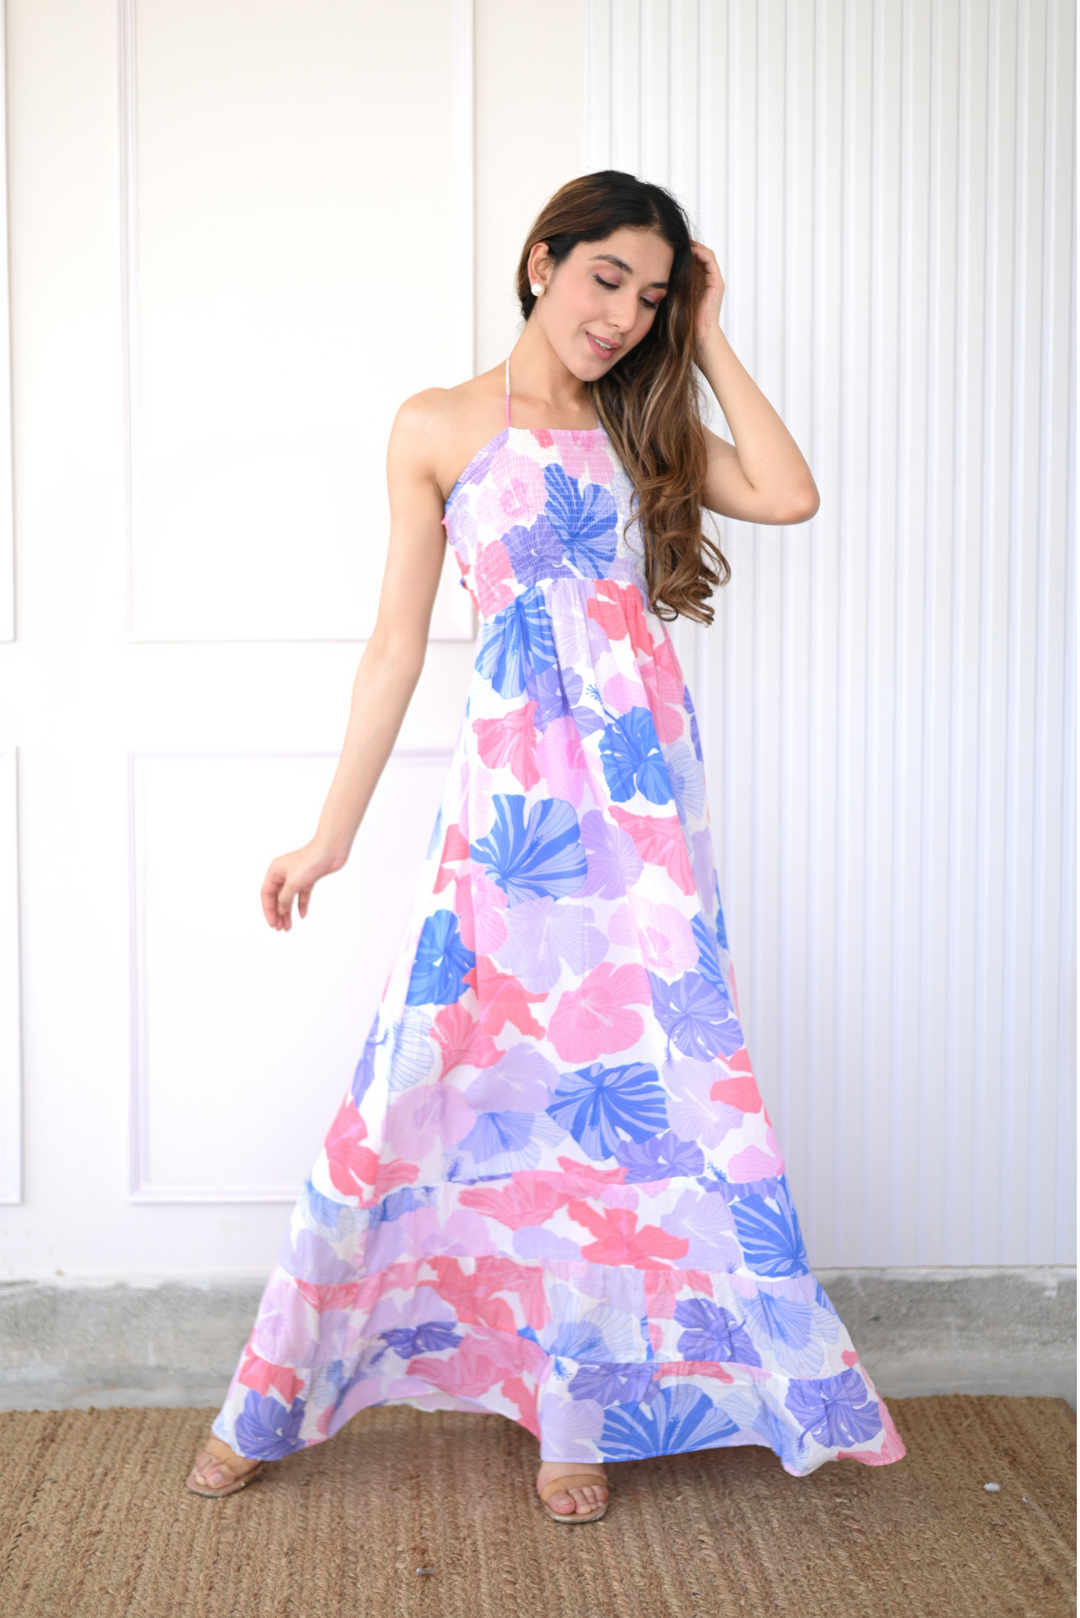 Floral beach party dress in pink and blue